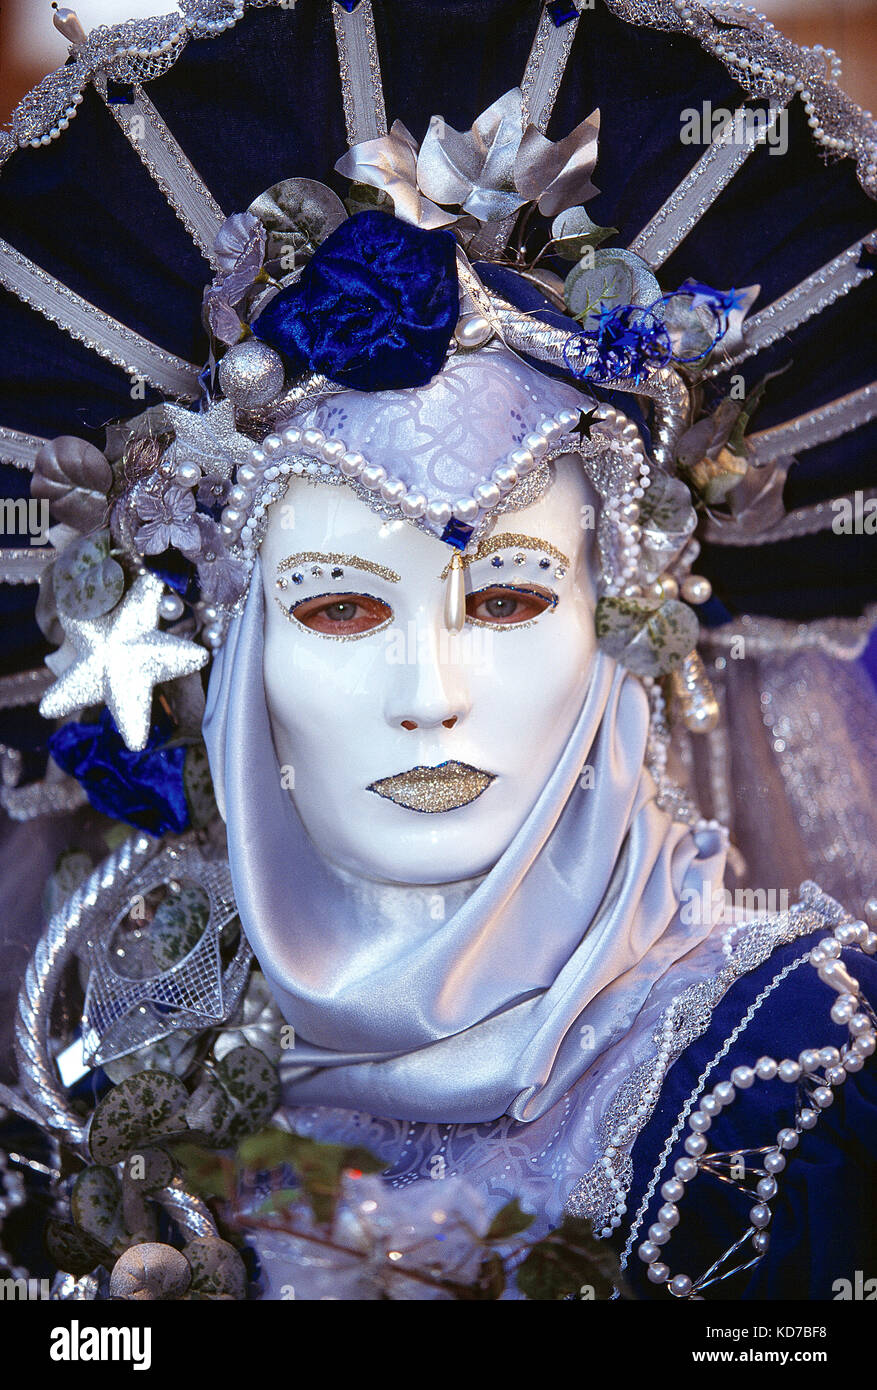 Italy. Venice. Carnival. Woman in costume. Close up of face with white mask. Stock Photo